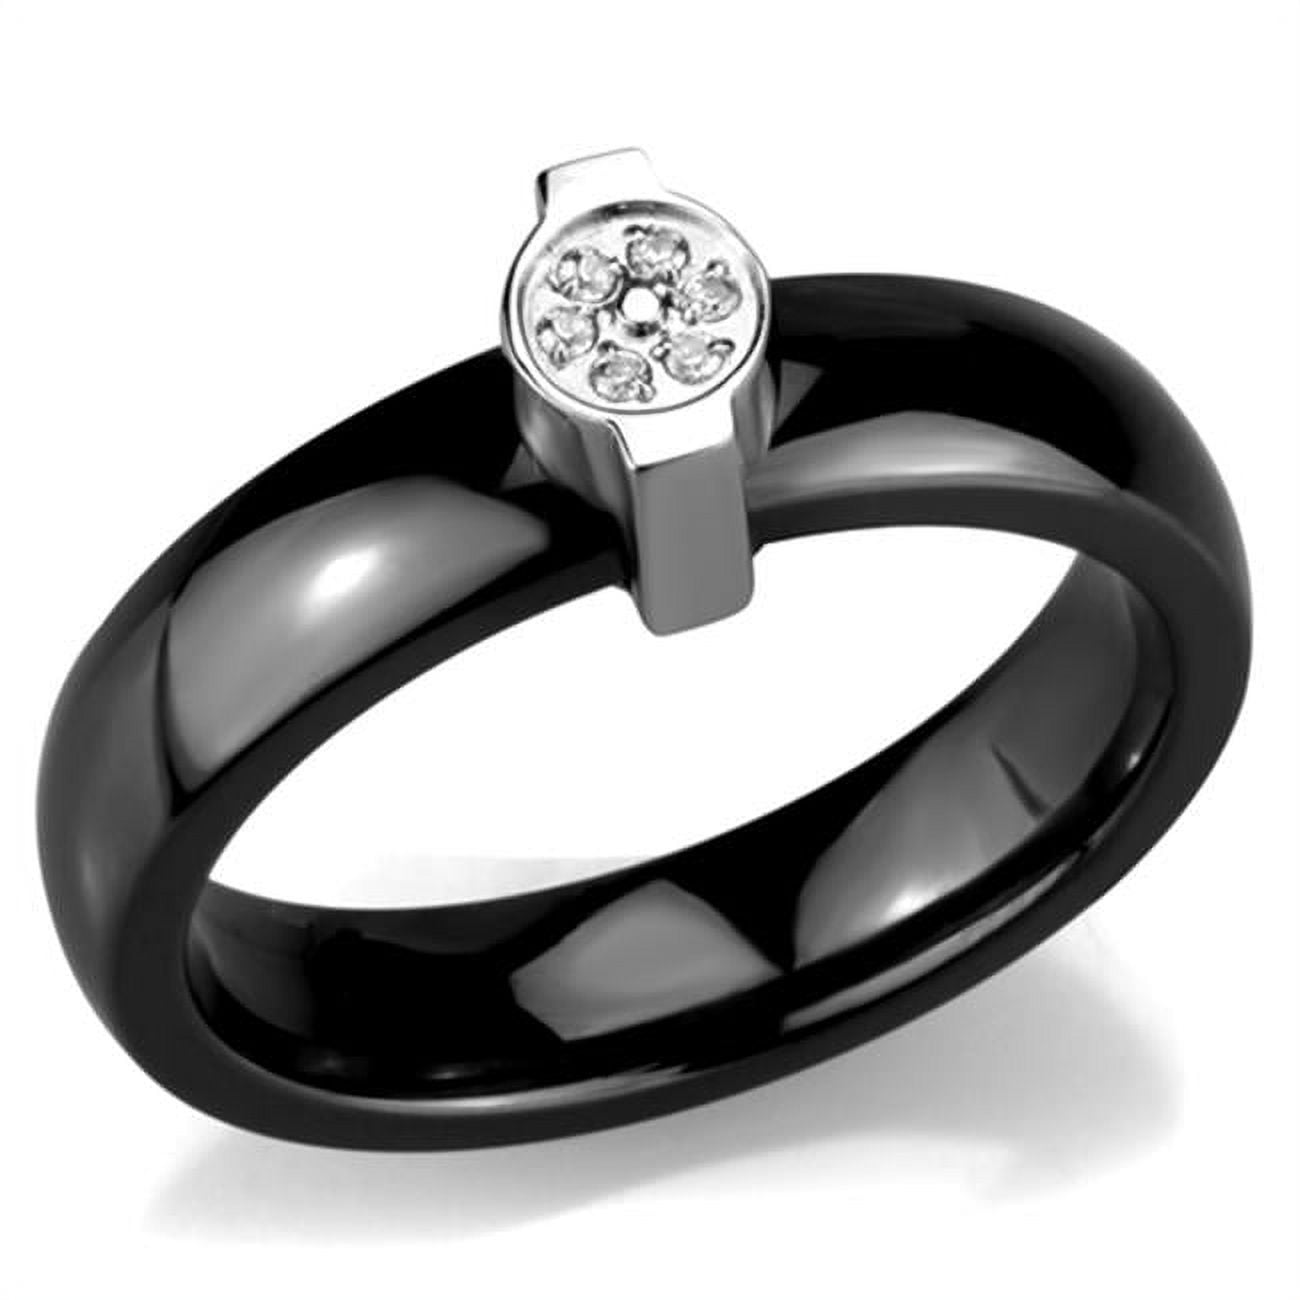 Picture of Alamode 3W959-7 Women High Polished Stainless Steel Ring with Ceramic in Jet - Size 7